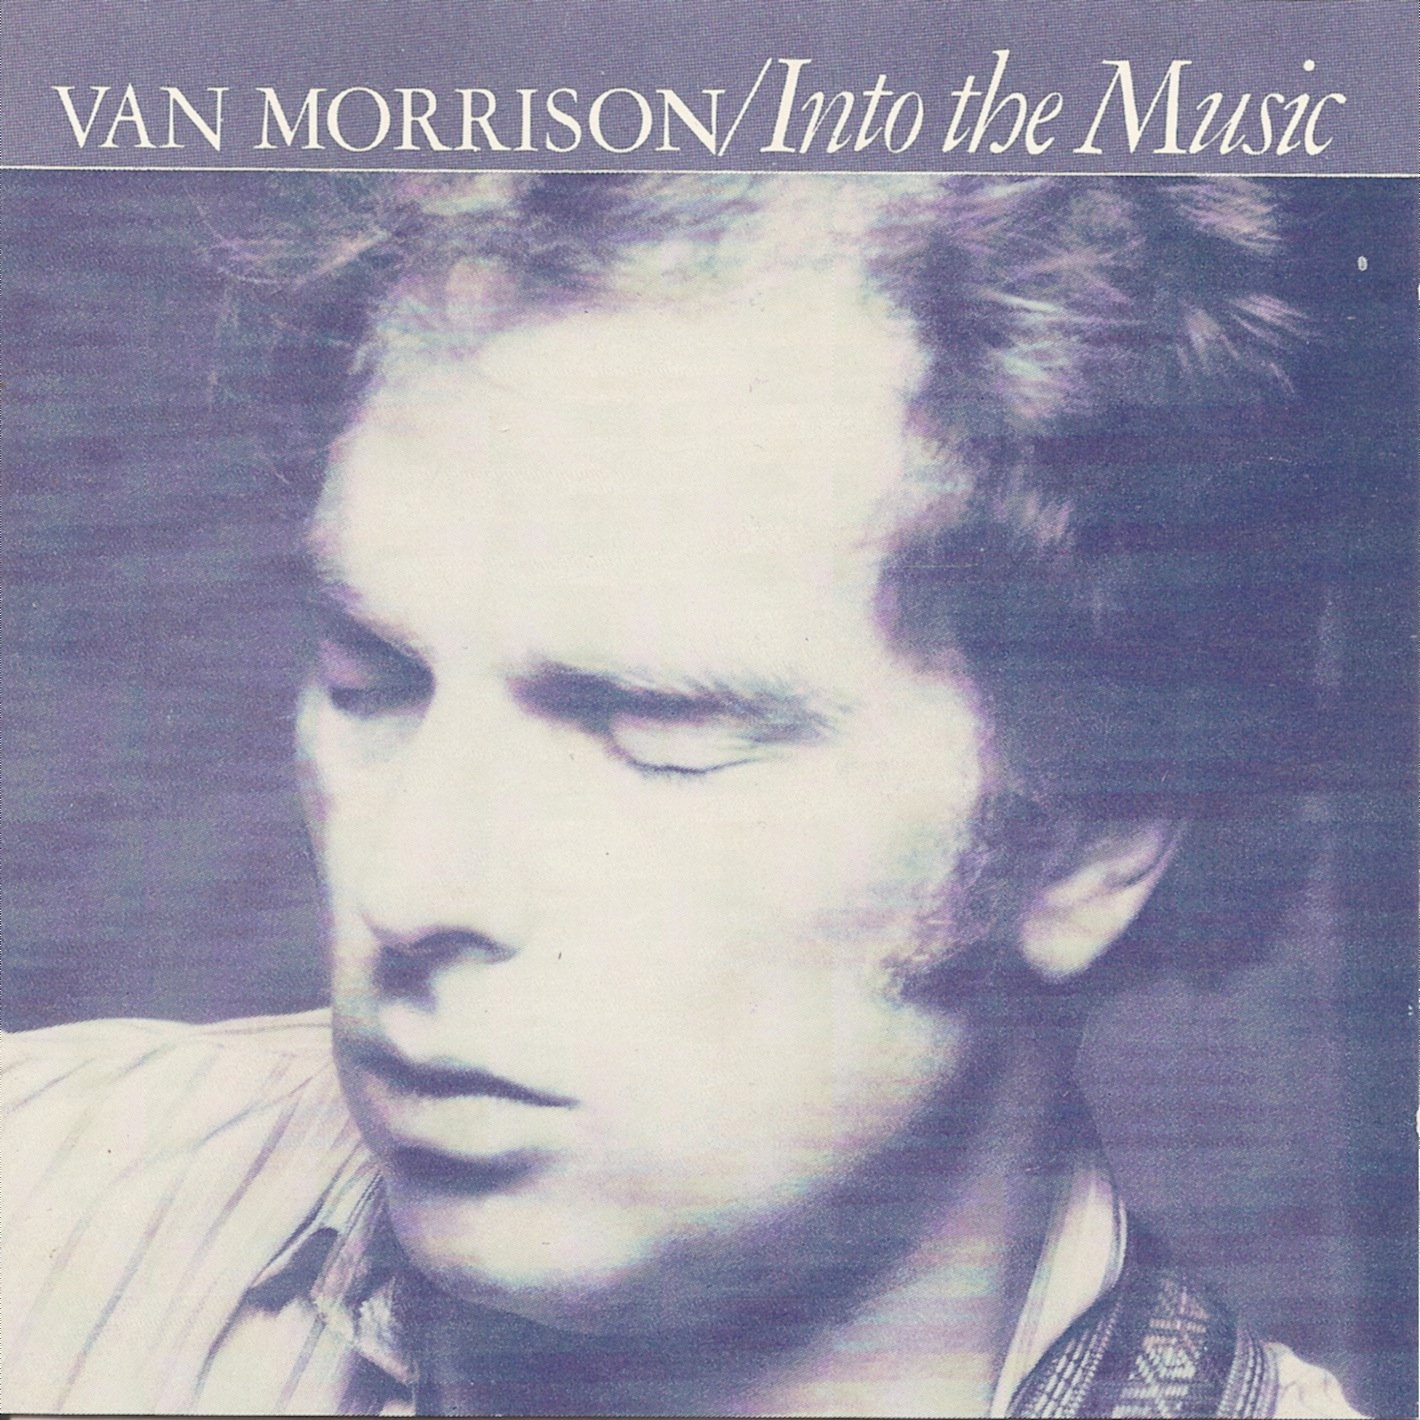 The First Pressing CD Collection: Van Morrison - Into the Music